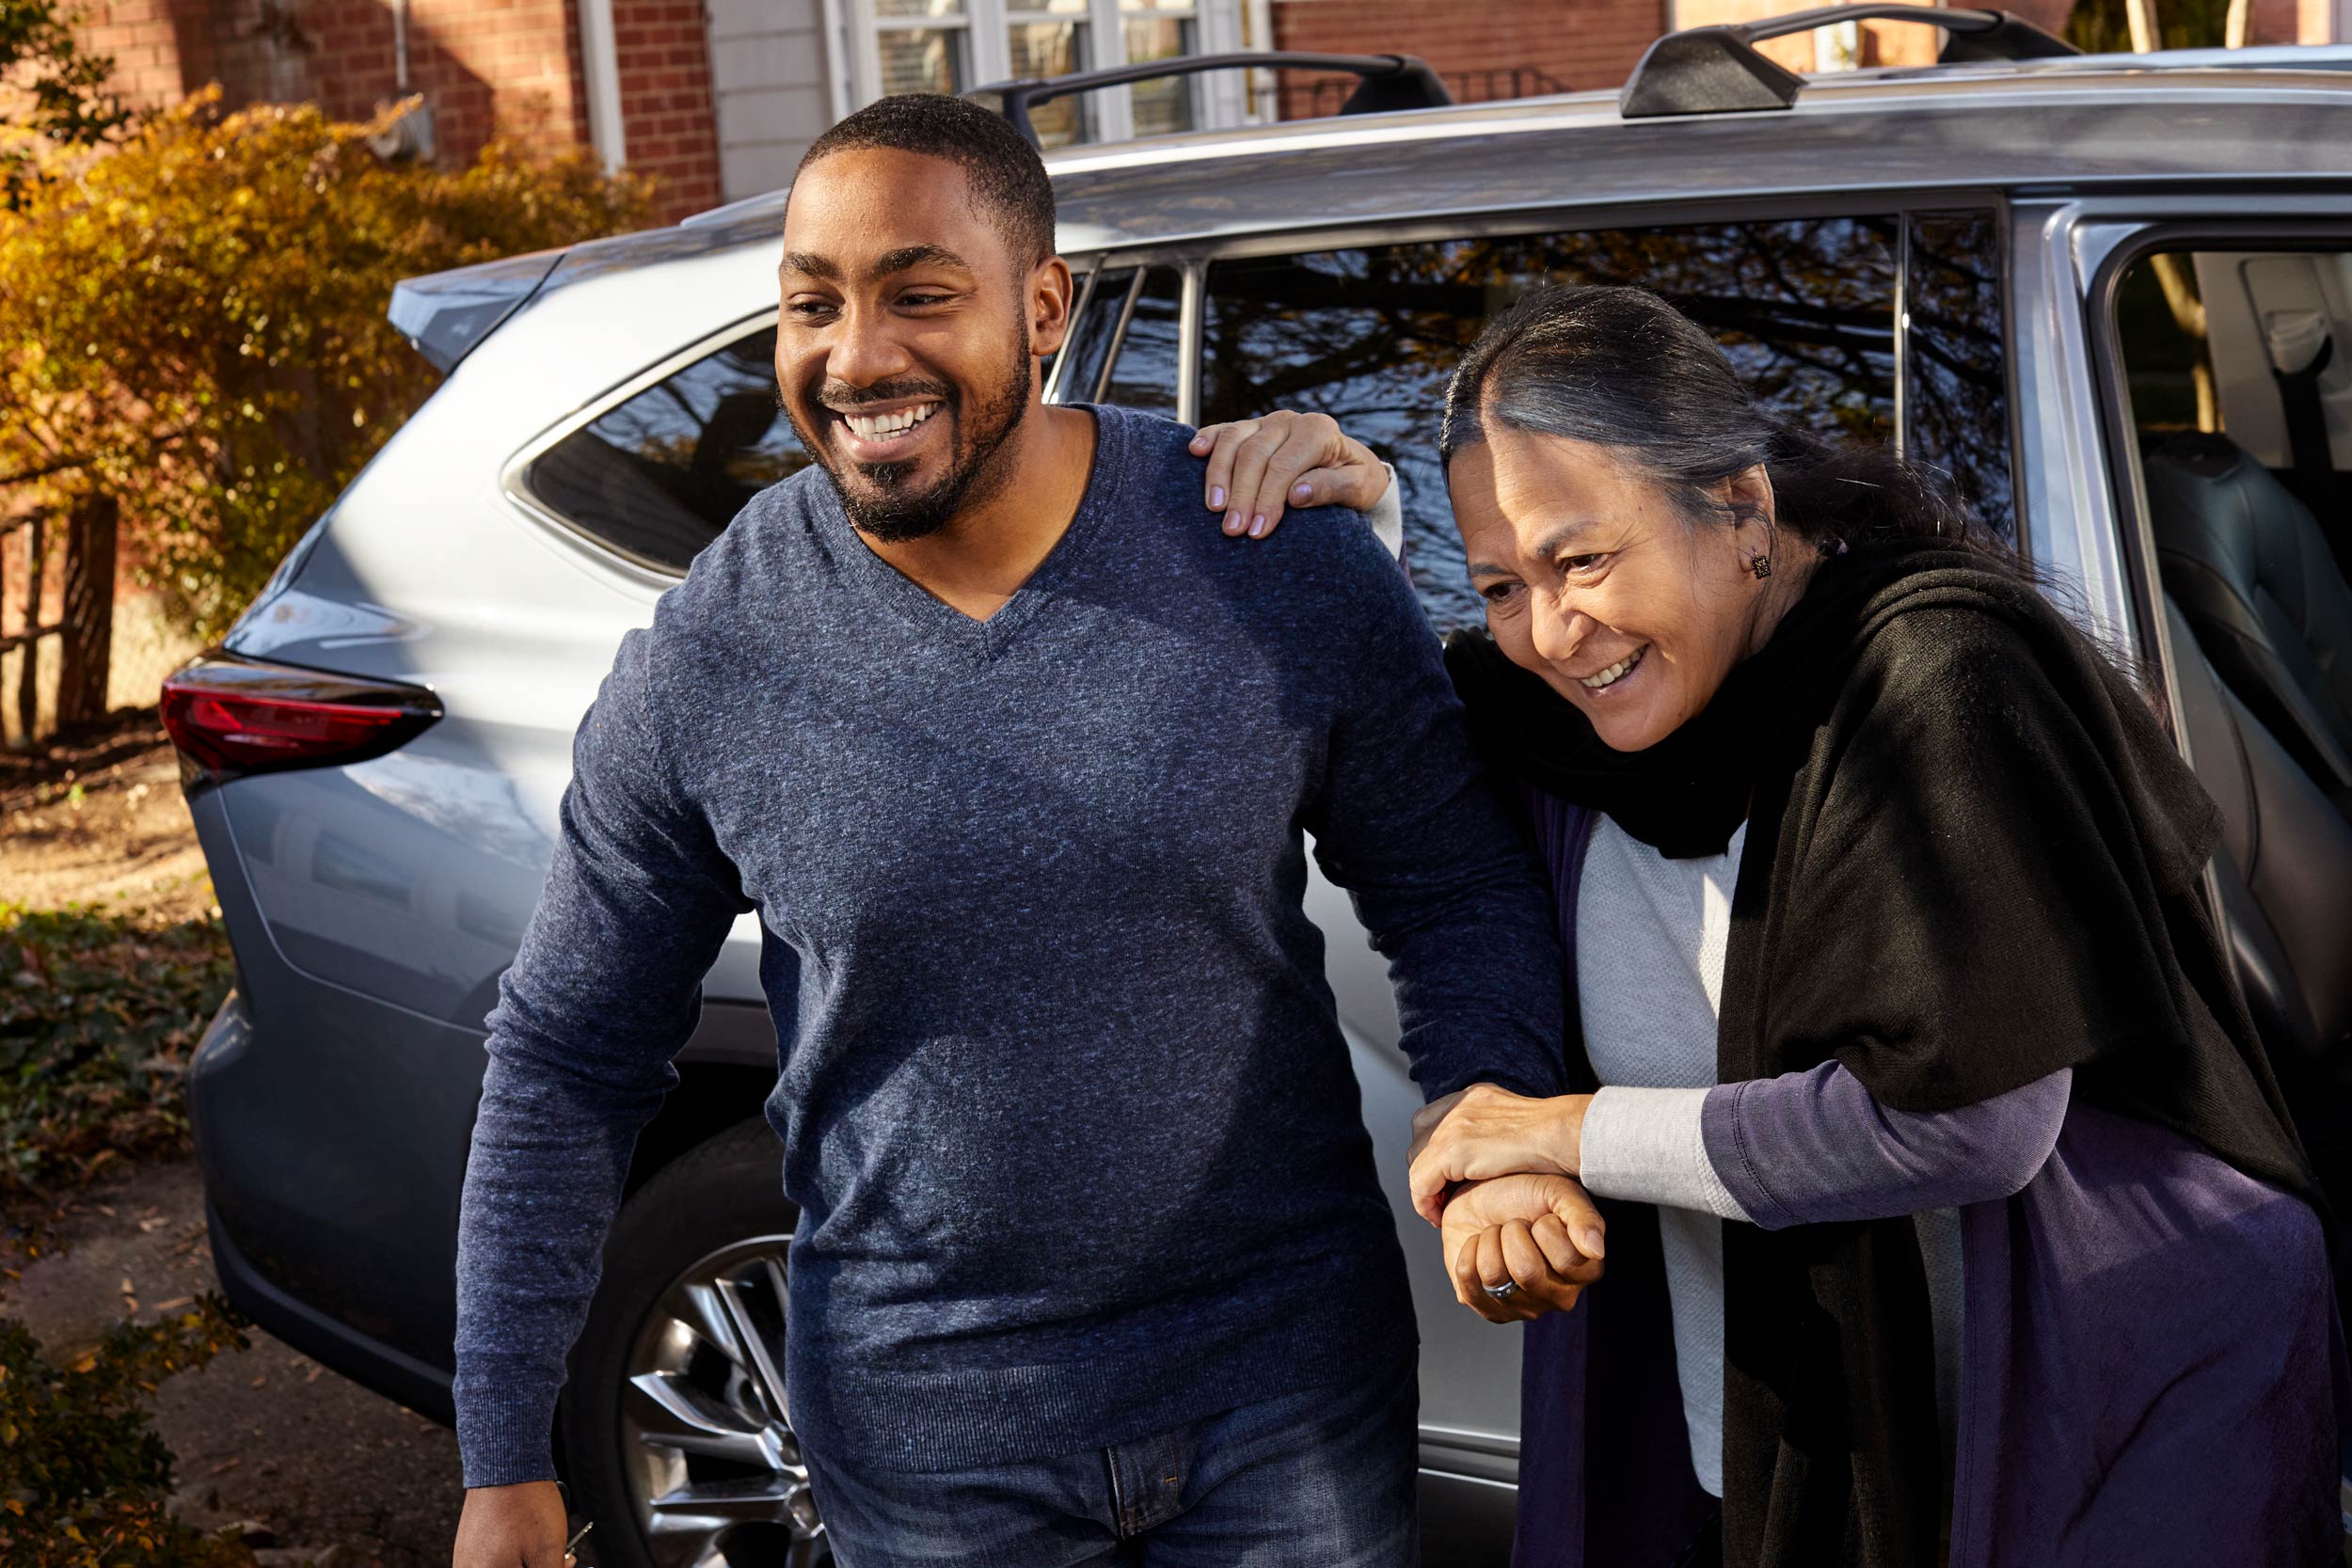 young-man-helping-elderly-woman-from-car-dc-commercial-photographer-eli-meir-kaplan